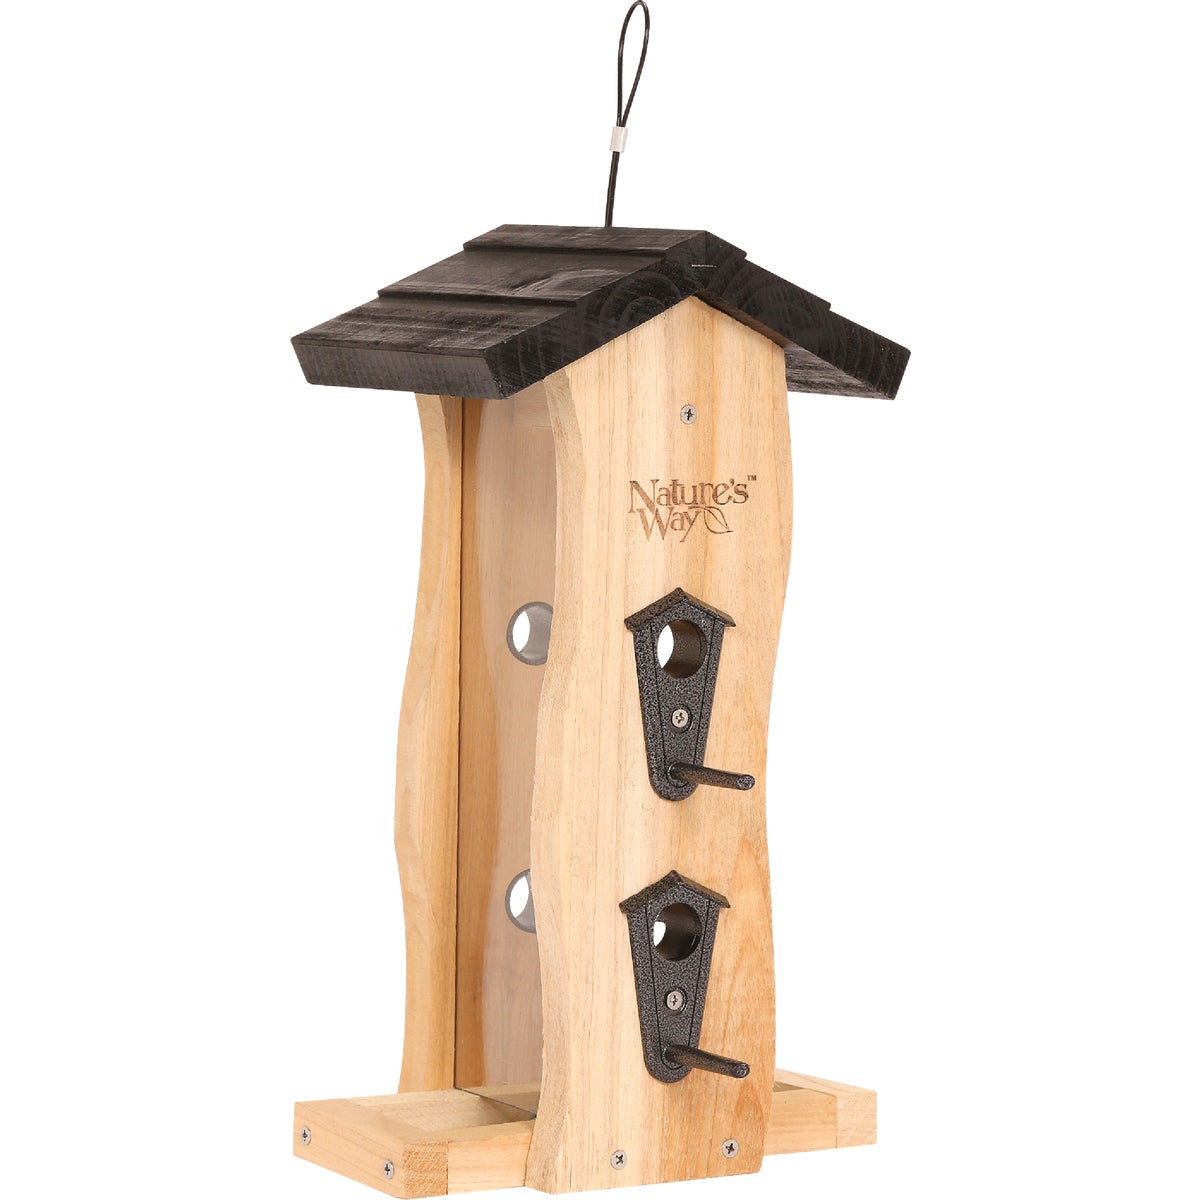 Item 704613, Vertical wave bird feeder is made with insect and rot resistant premium 